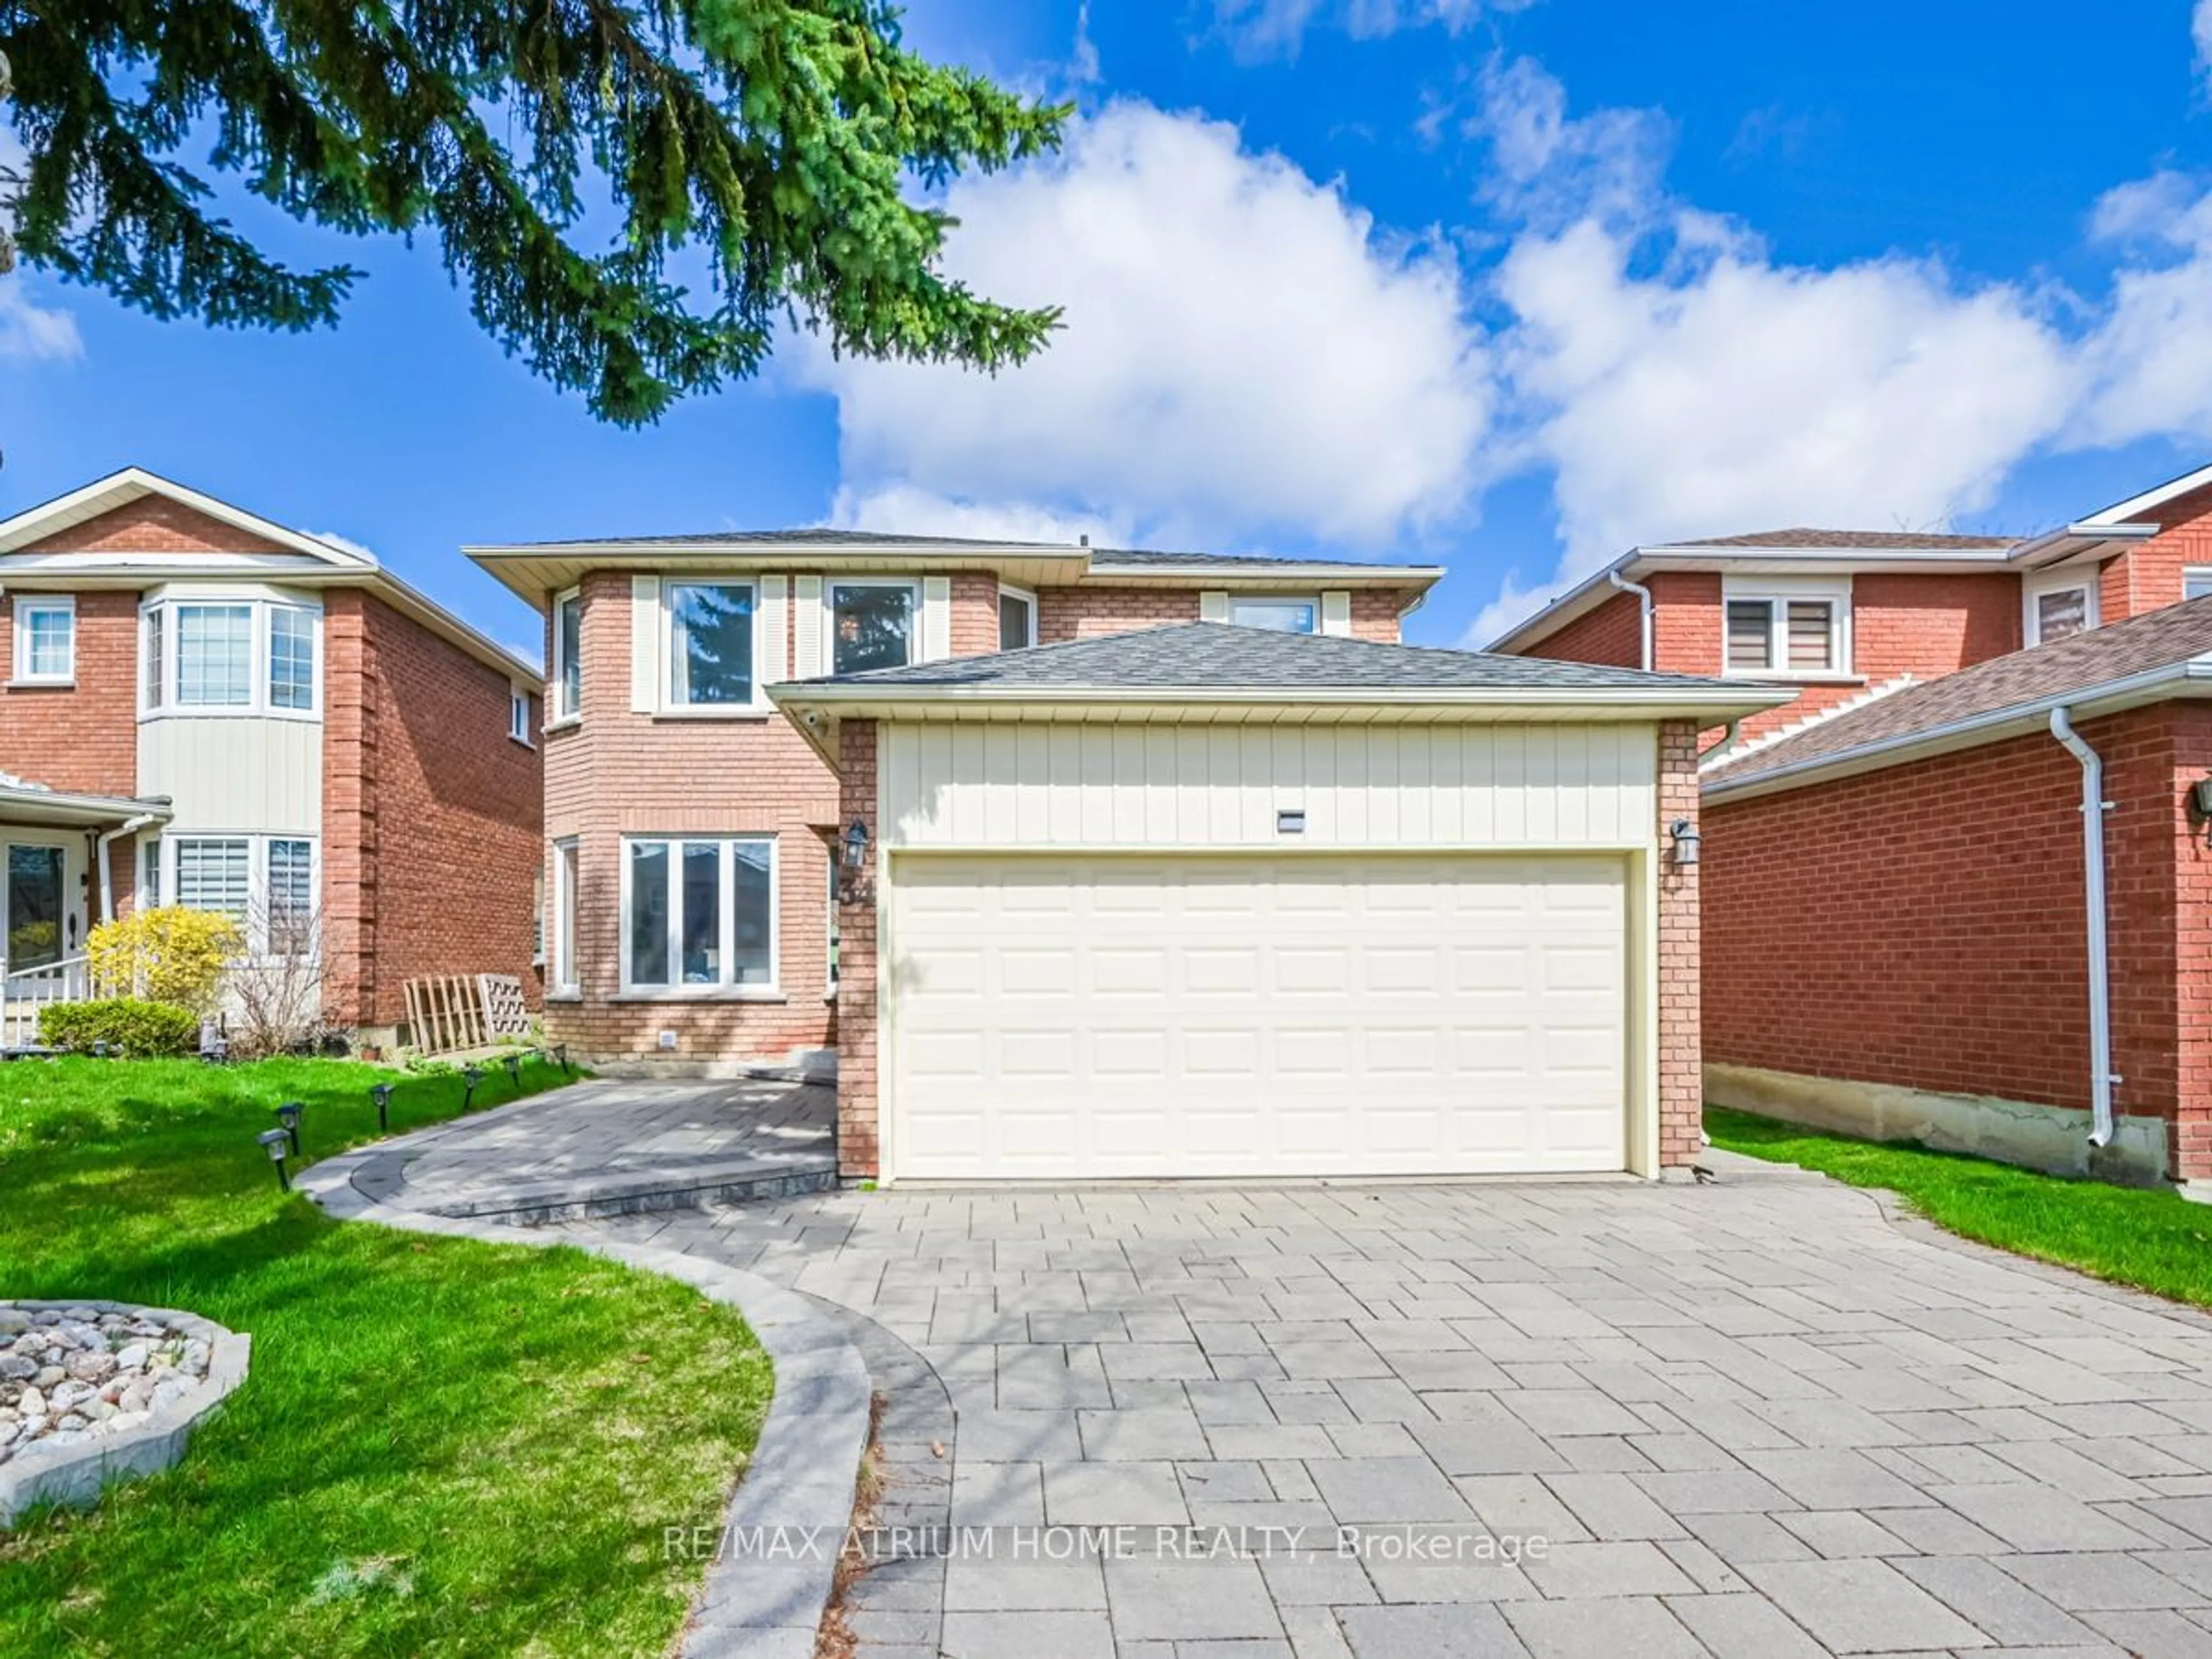 Home with brick exterior material for 34 Dunbarton Crt, Richmond Hill Ontario L4C 8G1